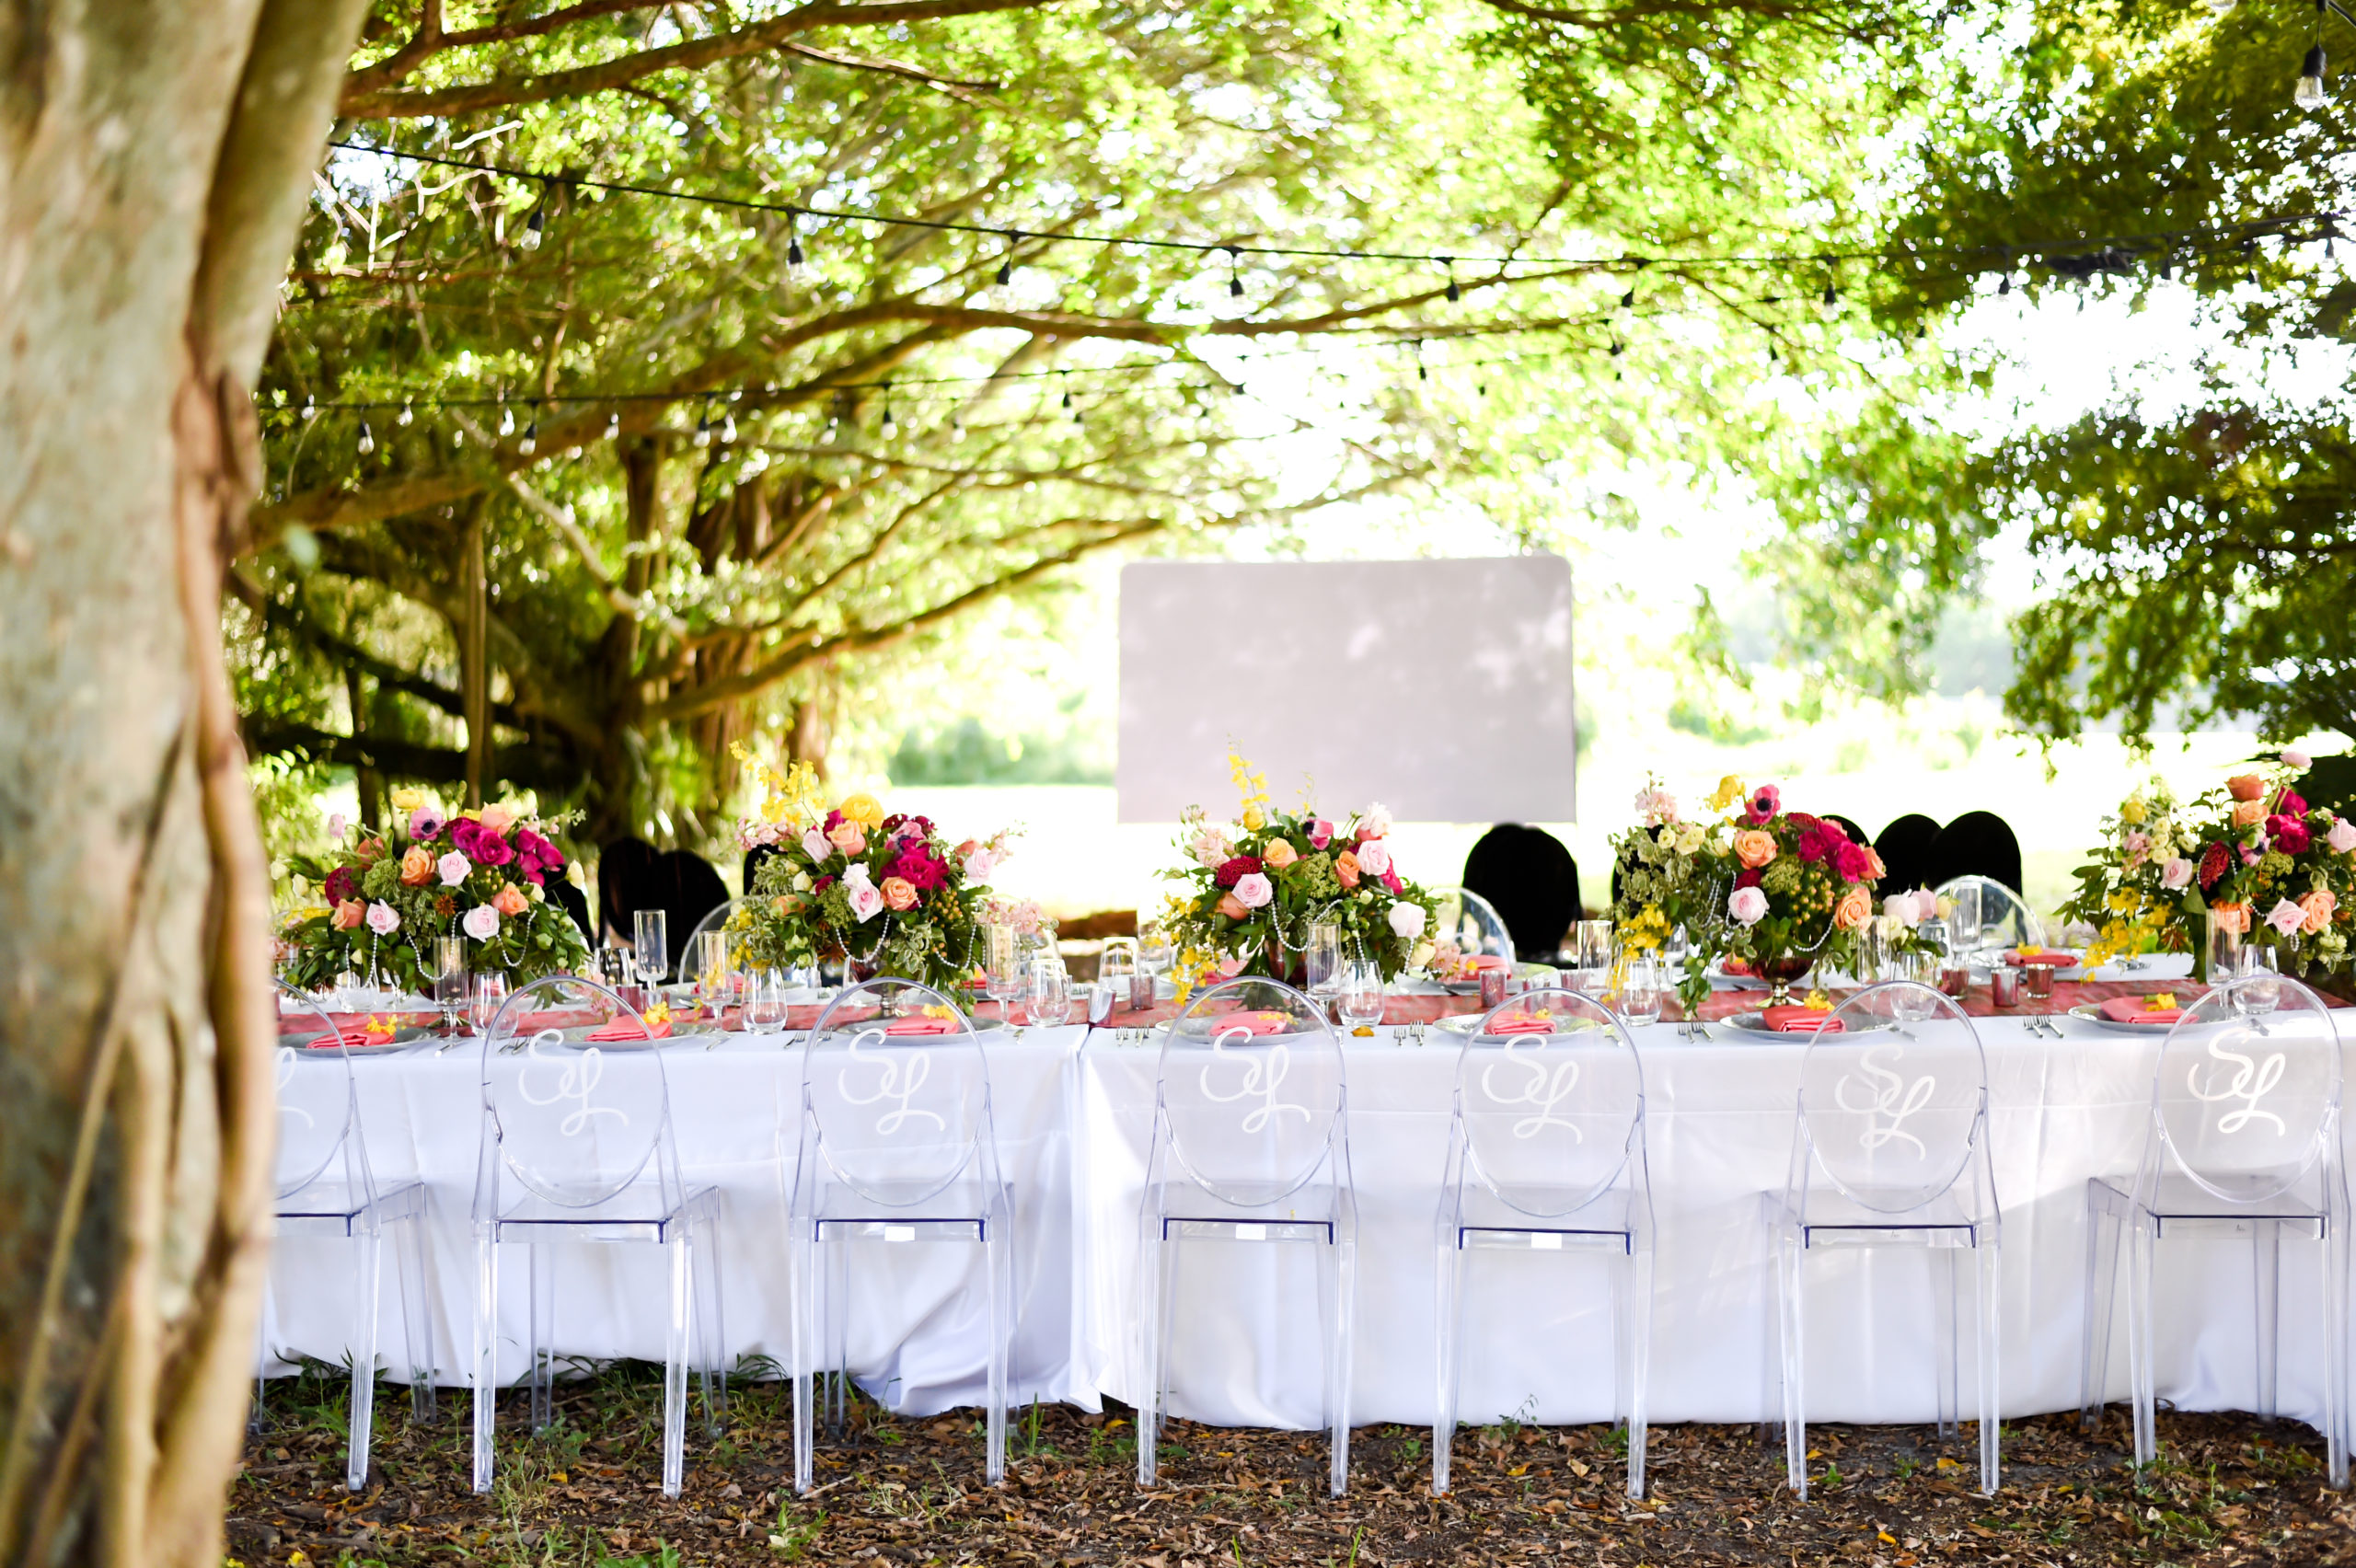 The outdoor wedding by Oh My Occasions has one long royal table with ghost chairs with vinyl decal infant of a projector screen and underneath bistro lights